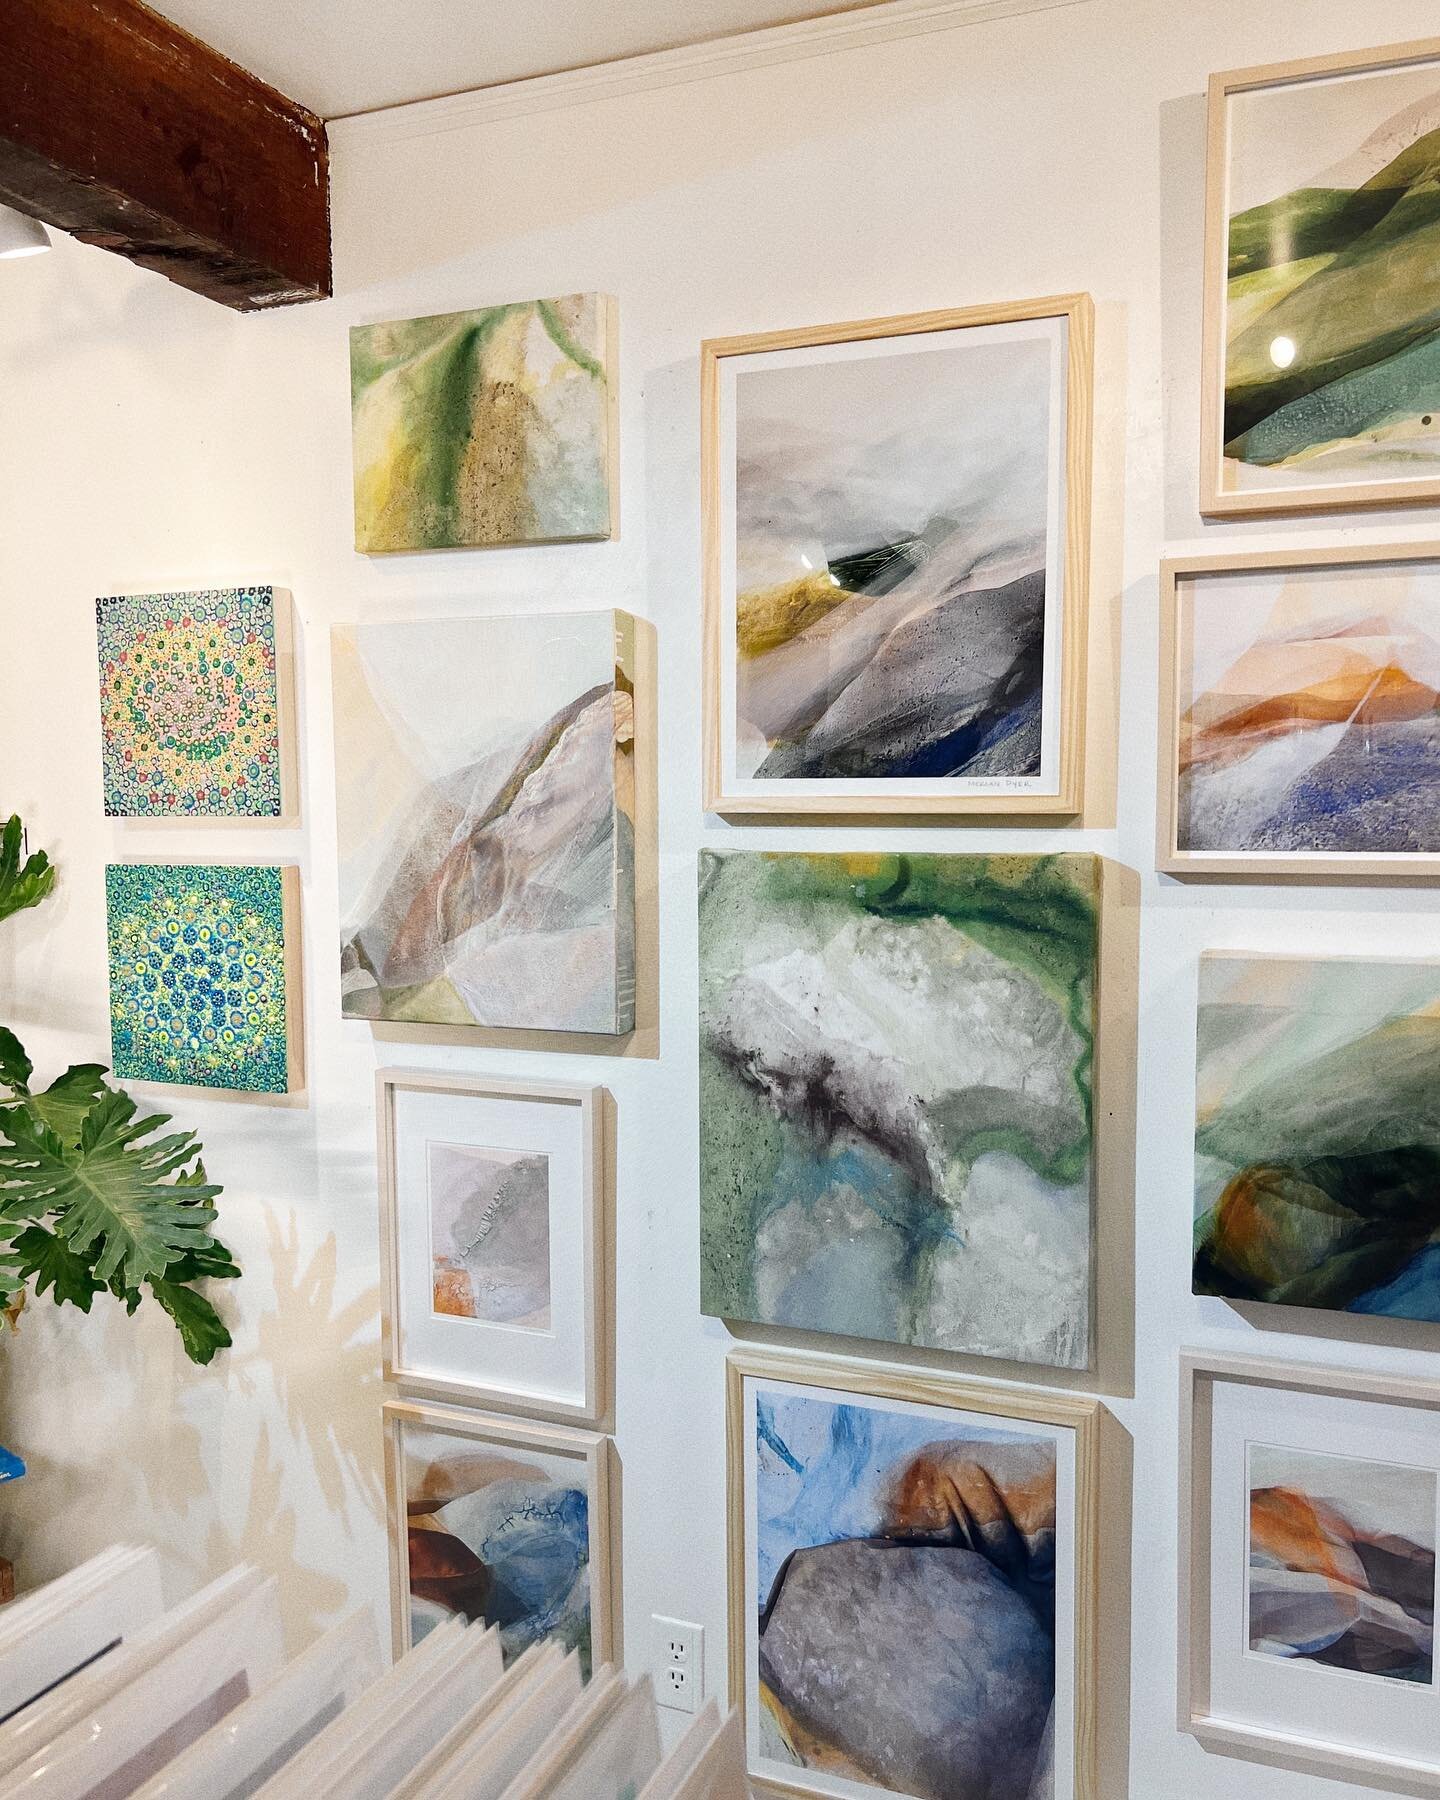 Gallery &amp; Shop wall is getting ready for holiday seasonnn~~ come visit this weekend shop is open Sat / Sun 12-6 🍓
. 
.
.
.
.
.
.
.
.
.
.
.
. 
.
.
.
.
.
. 
.
.
#vsco #vscocam #vscogood #paint #painter #art #artist #modernart #landscapepainting #a